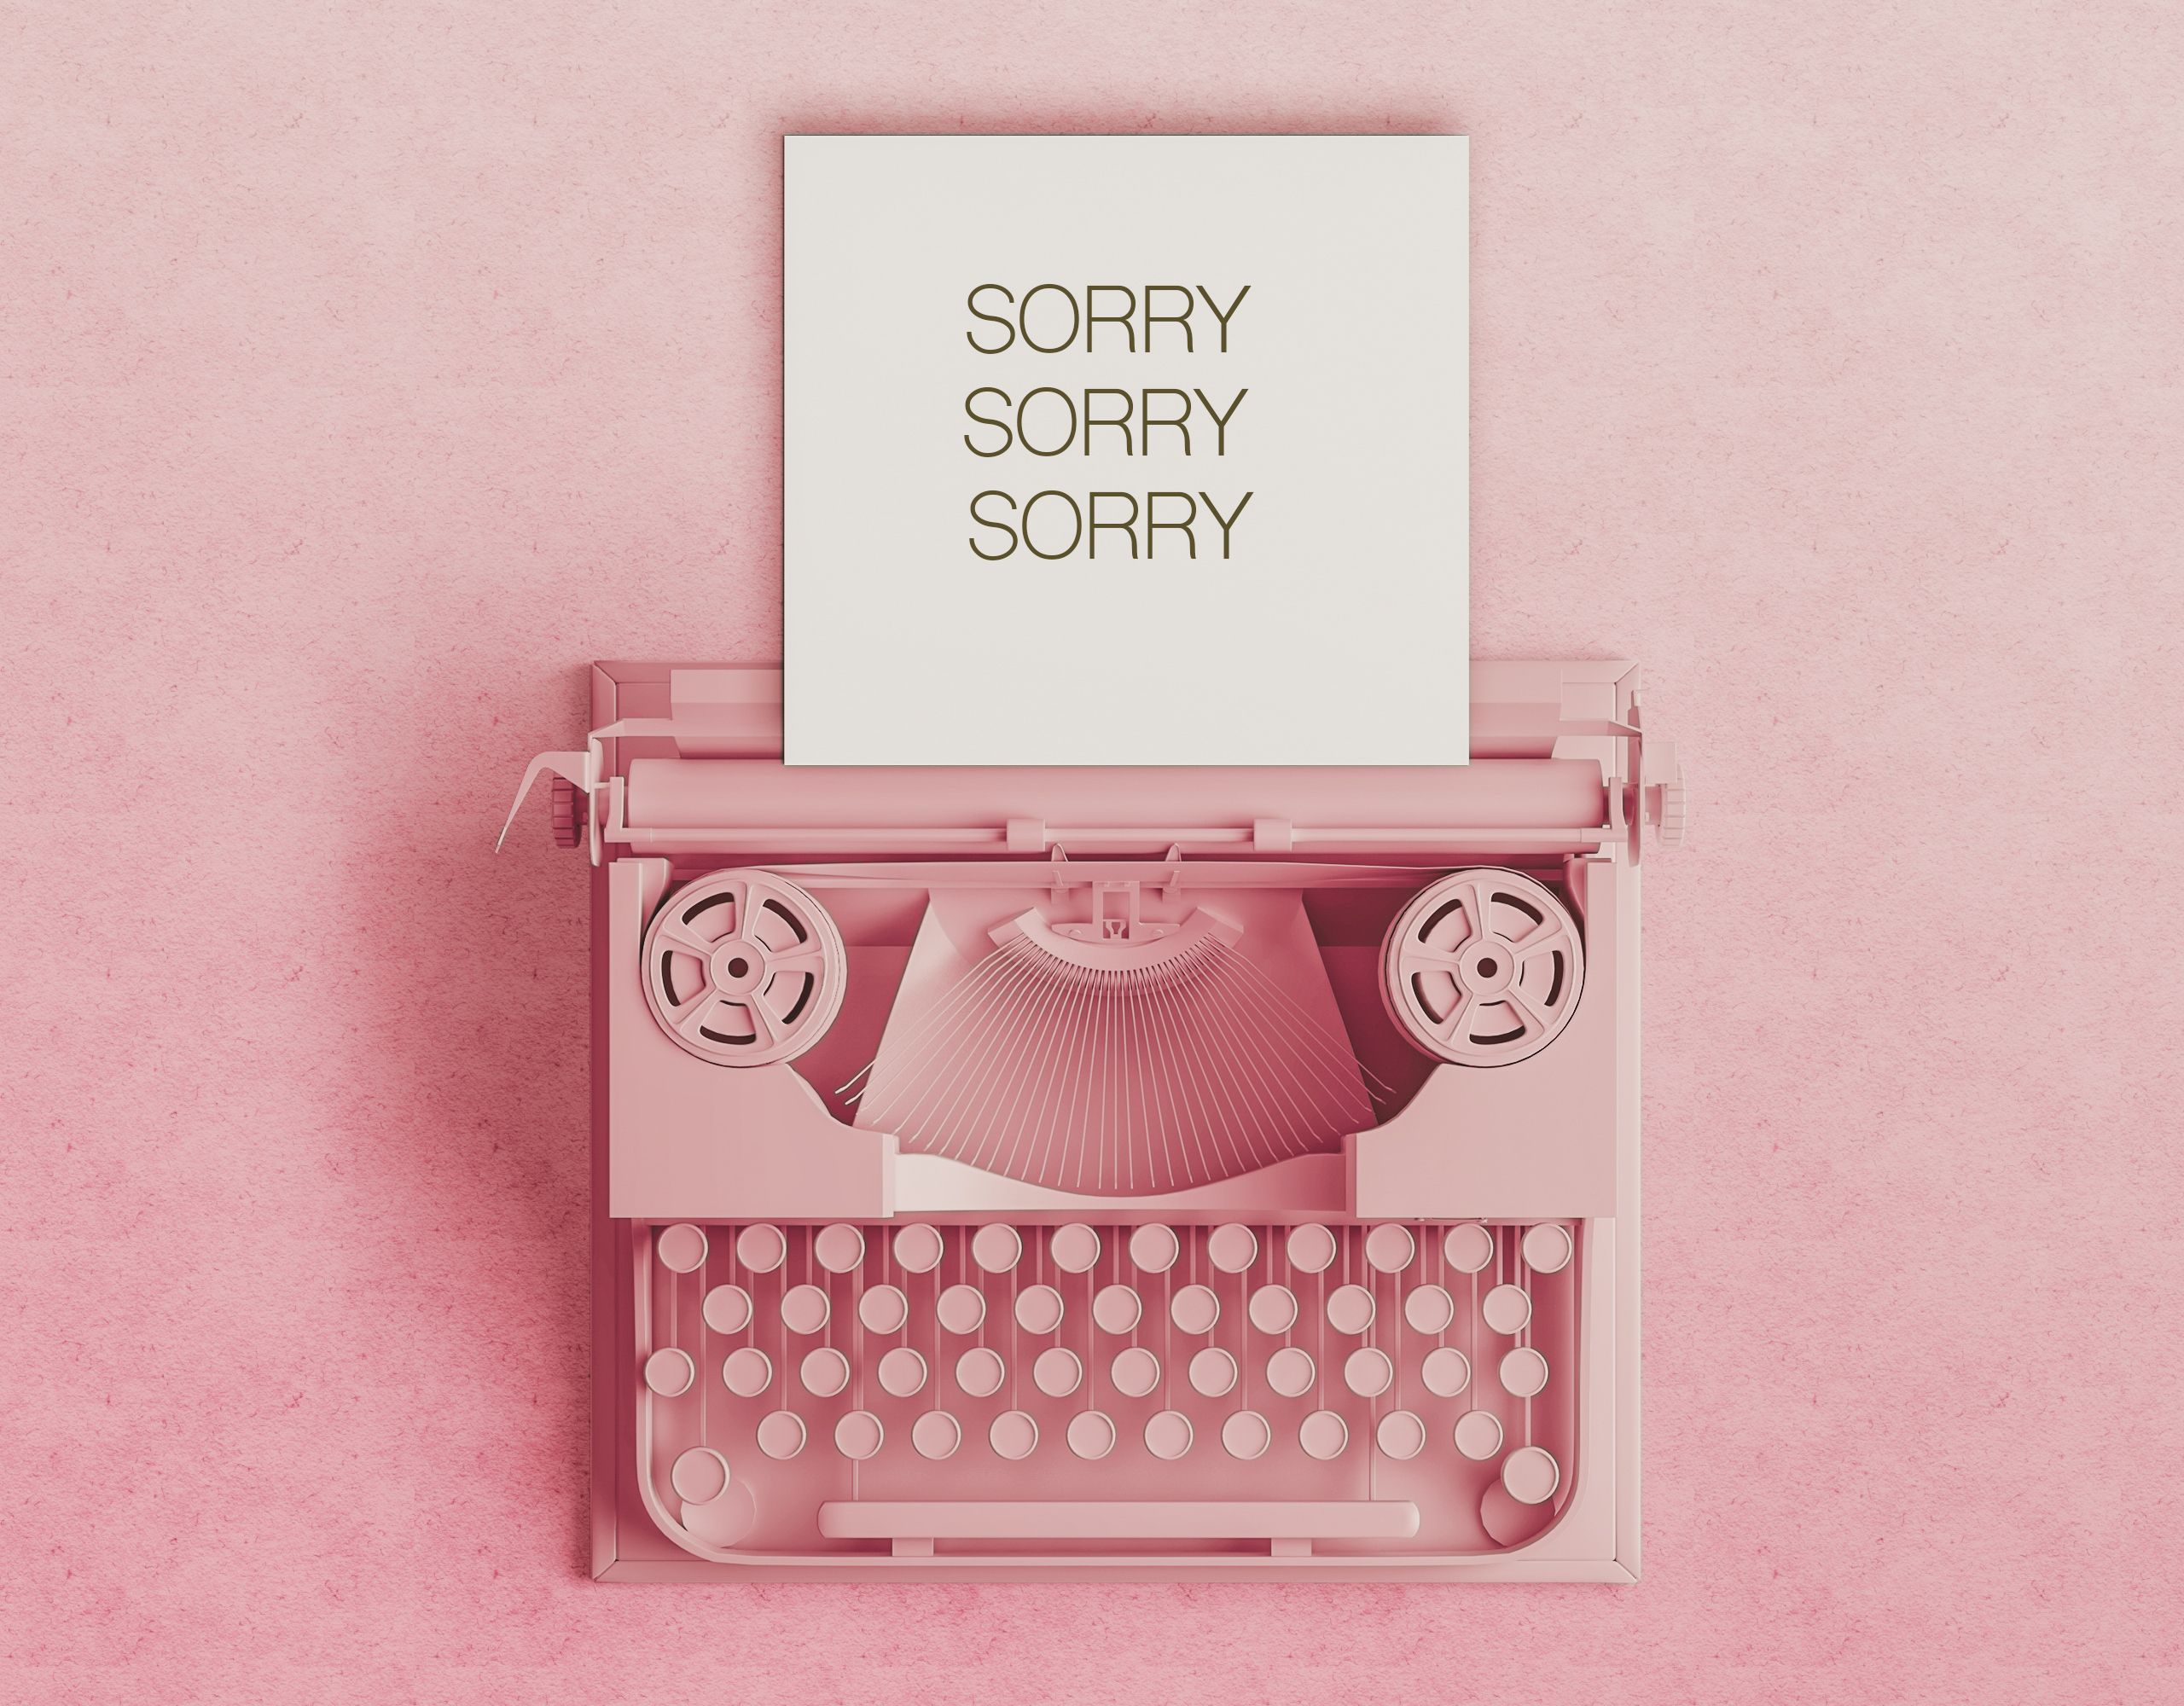 sorry message in paper  on feminine desktop with coffee cup, pink pen and candles